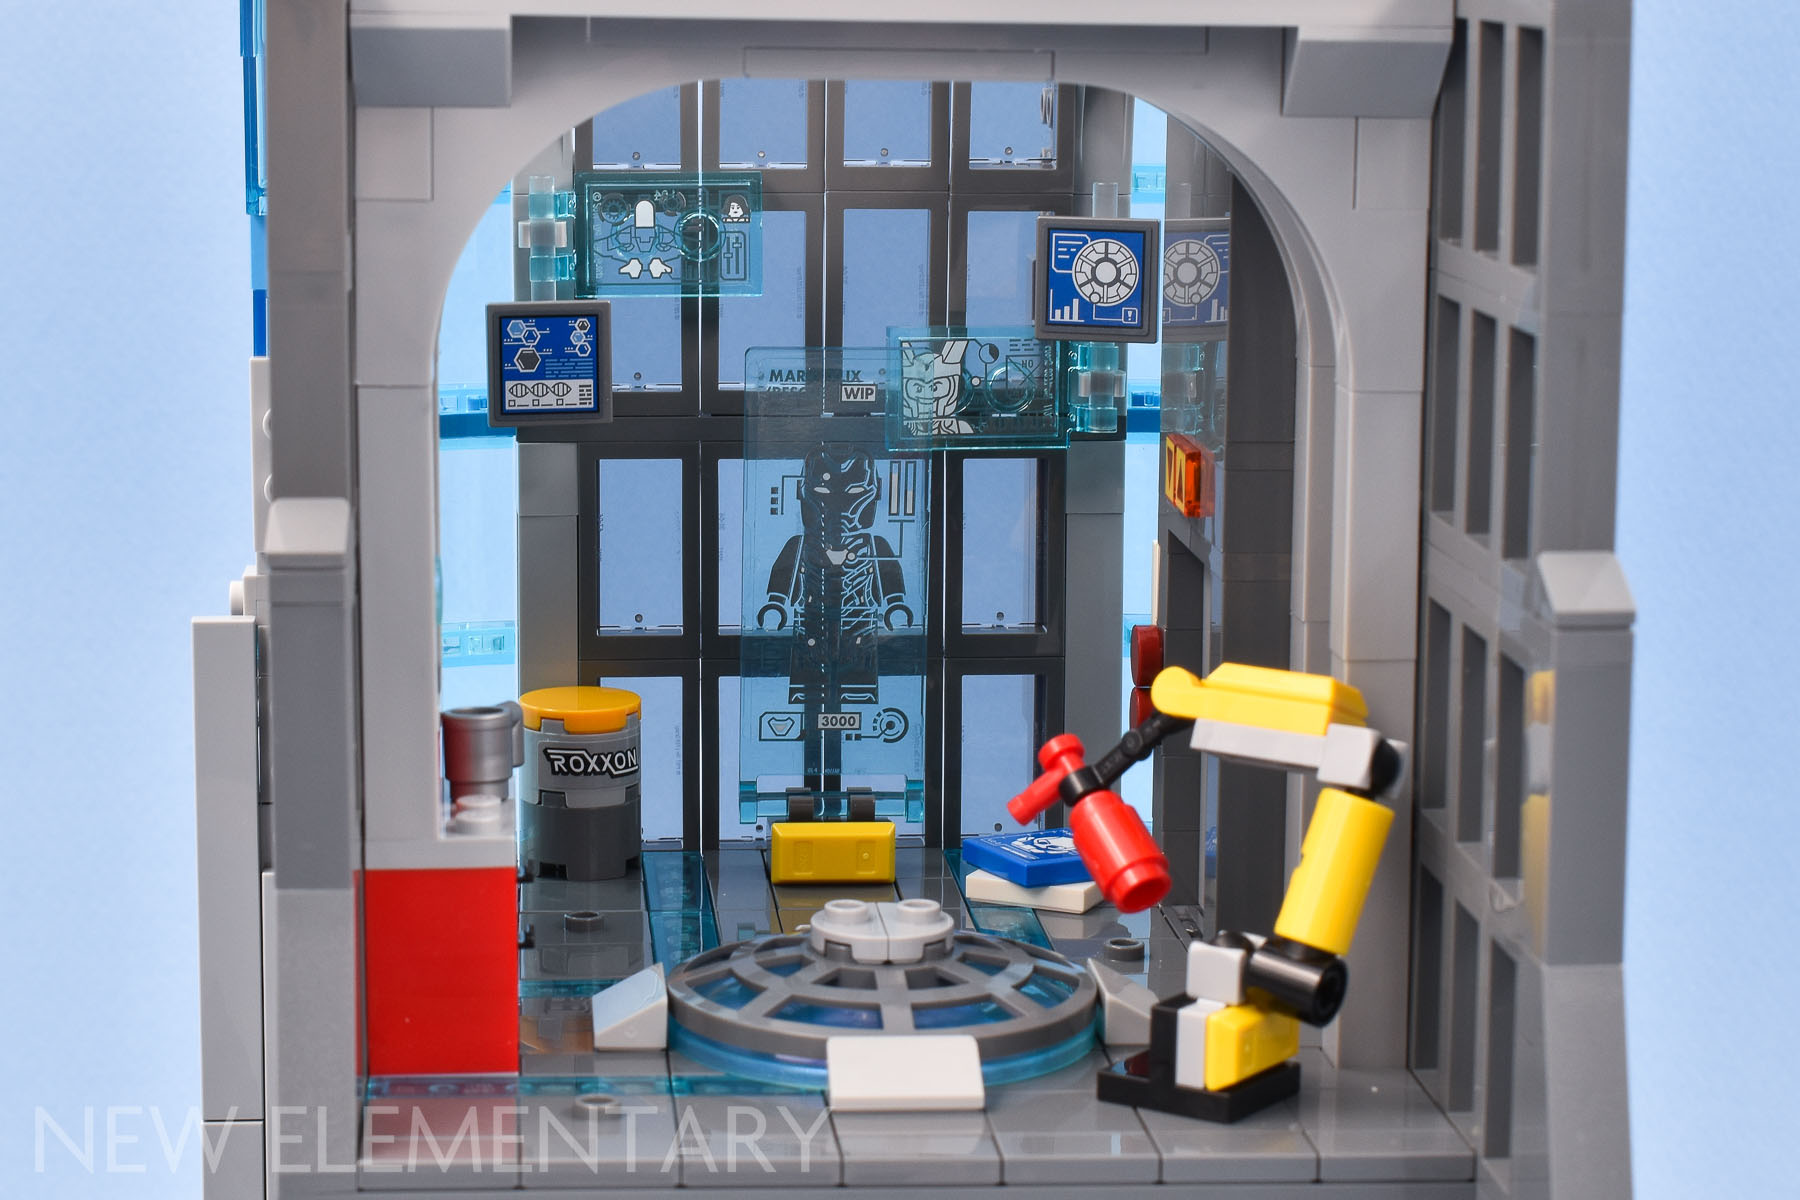 LEGOⓇ Marvel™ set review: 76269 Avengers Tower  New Elementary: LEGO®  parts, sets and techniques